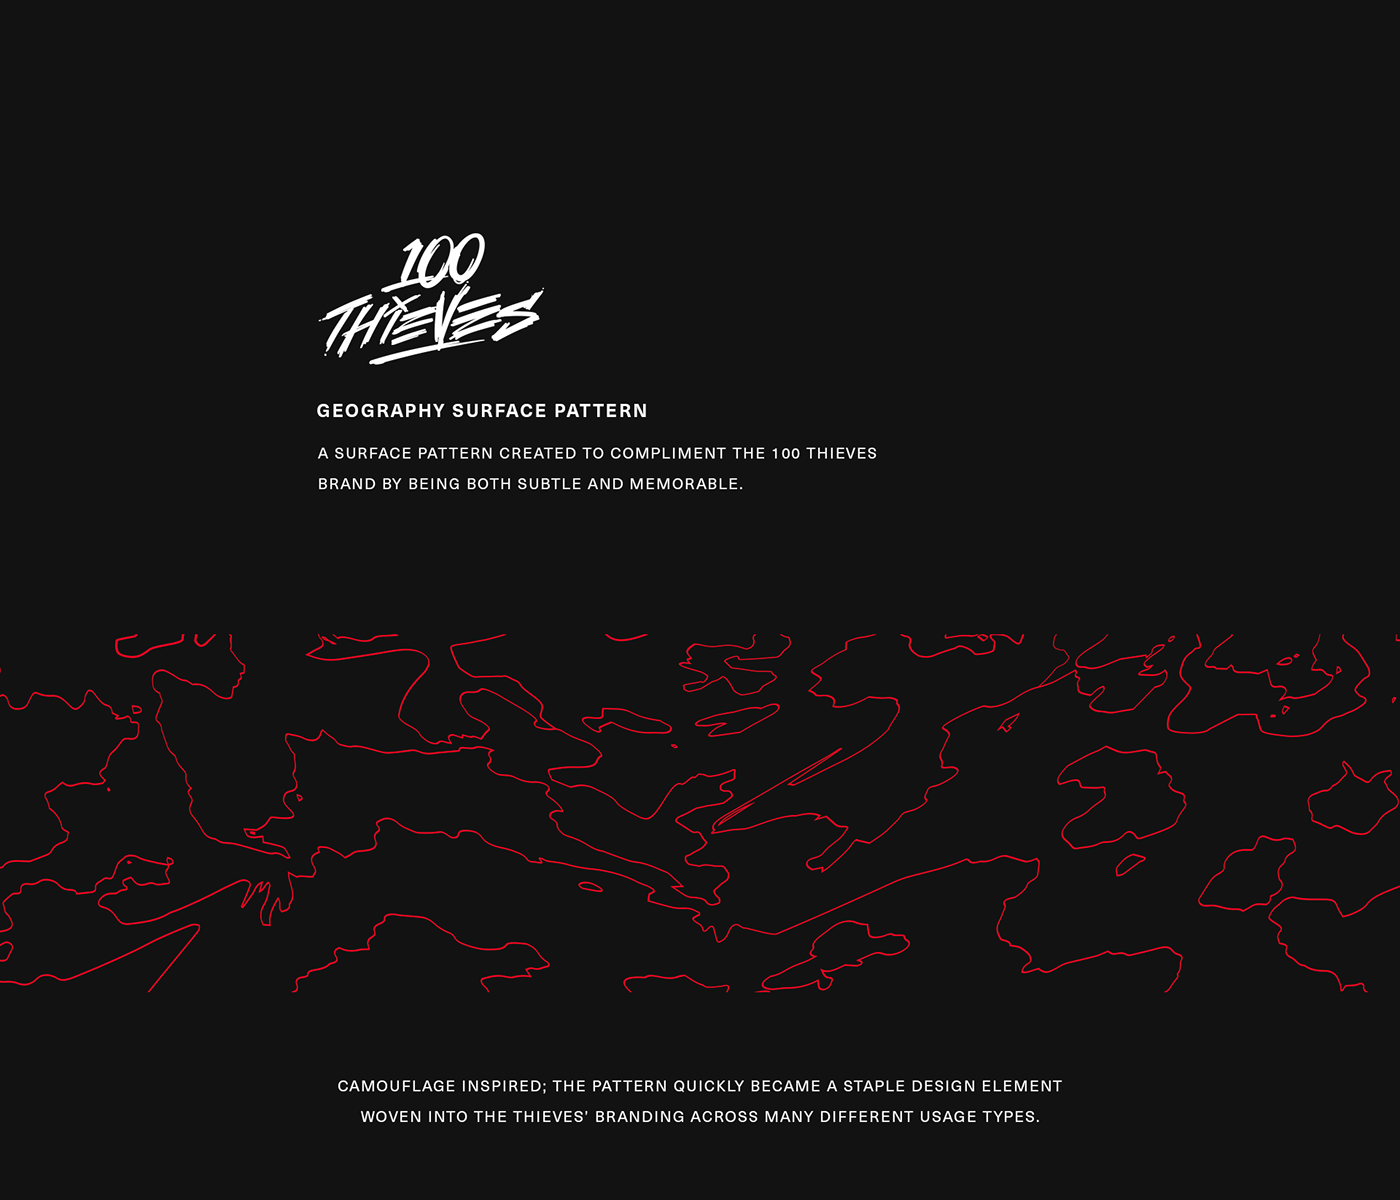 100 Thieves Geography pattern Surface Pattern